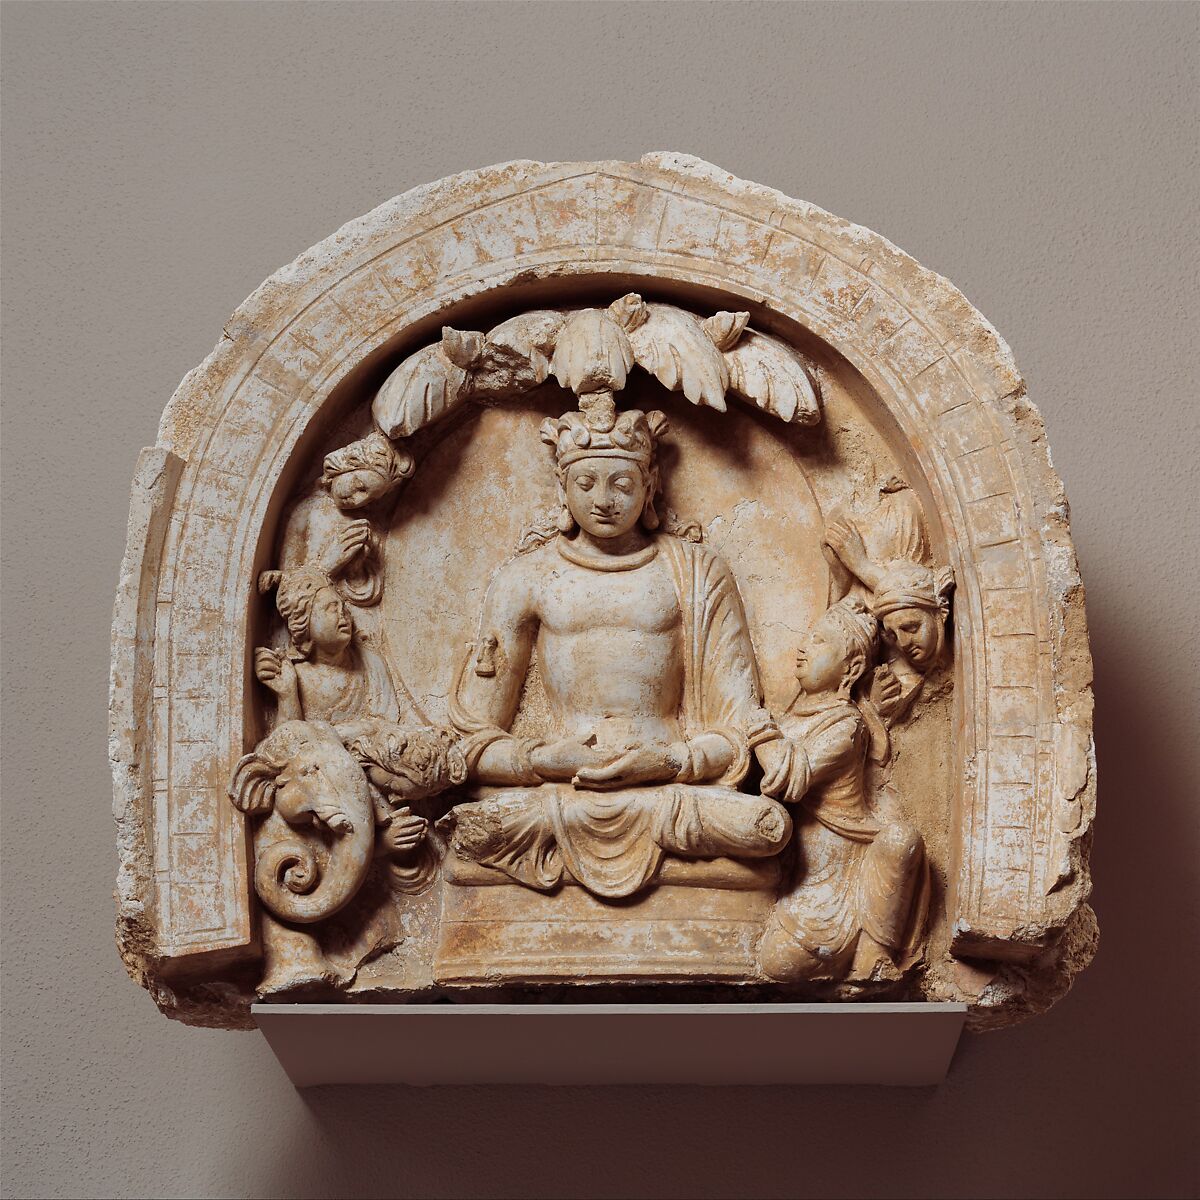 Niche with the Seated Bodhisattva Shakyamuni Flanked by Devotees and an Elephant